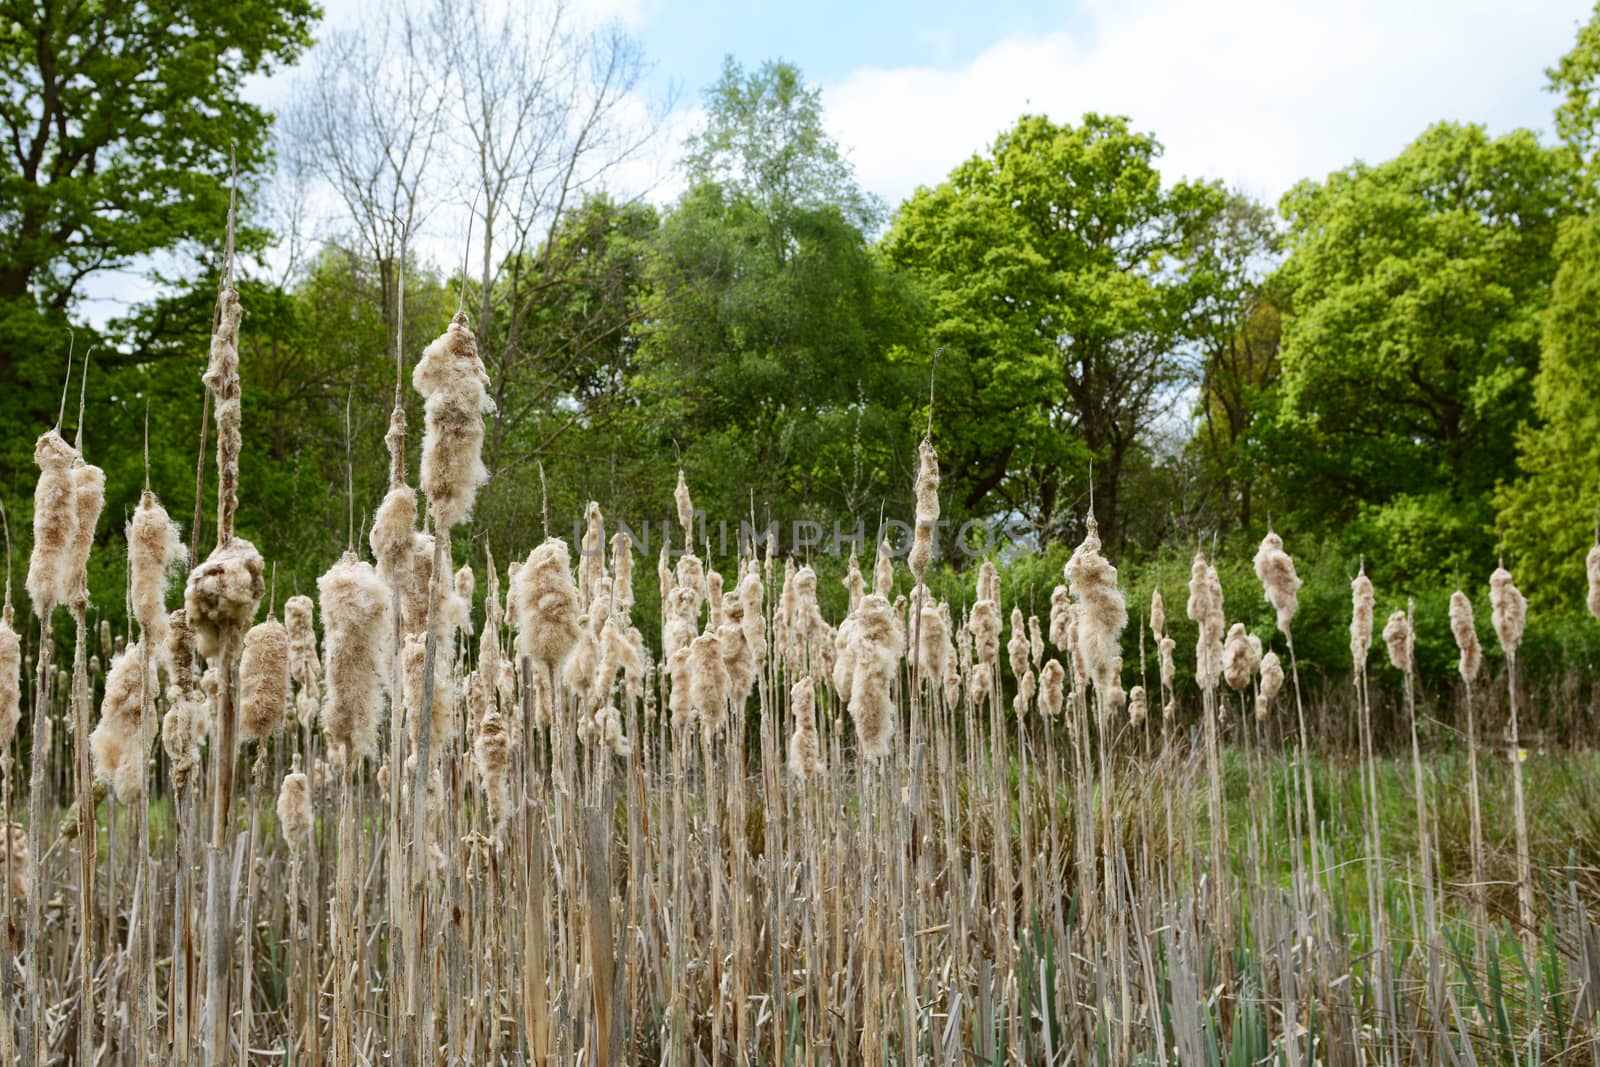 Old bulrush seed heads fall apart above a rural pond, allowing the seeds to disperse. Verdant green trees stand tall beyond.